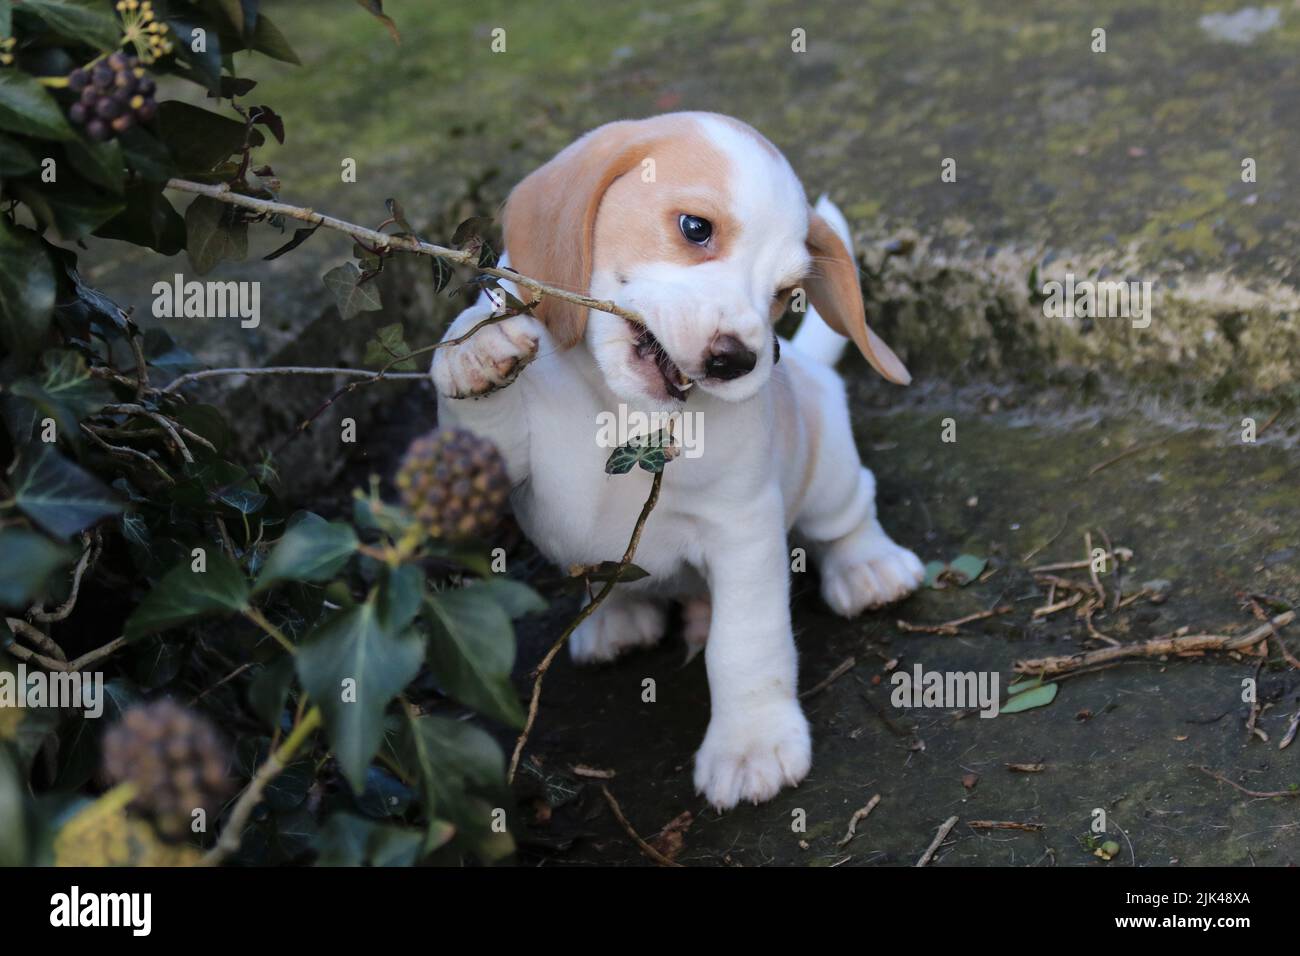 A beagle puppy being mischievous Stock Photo